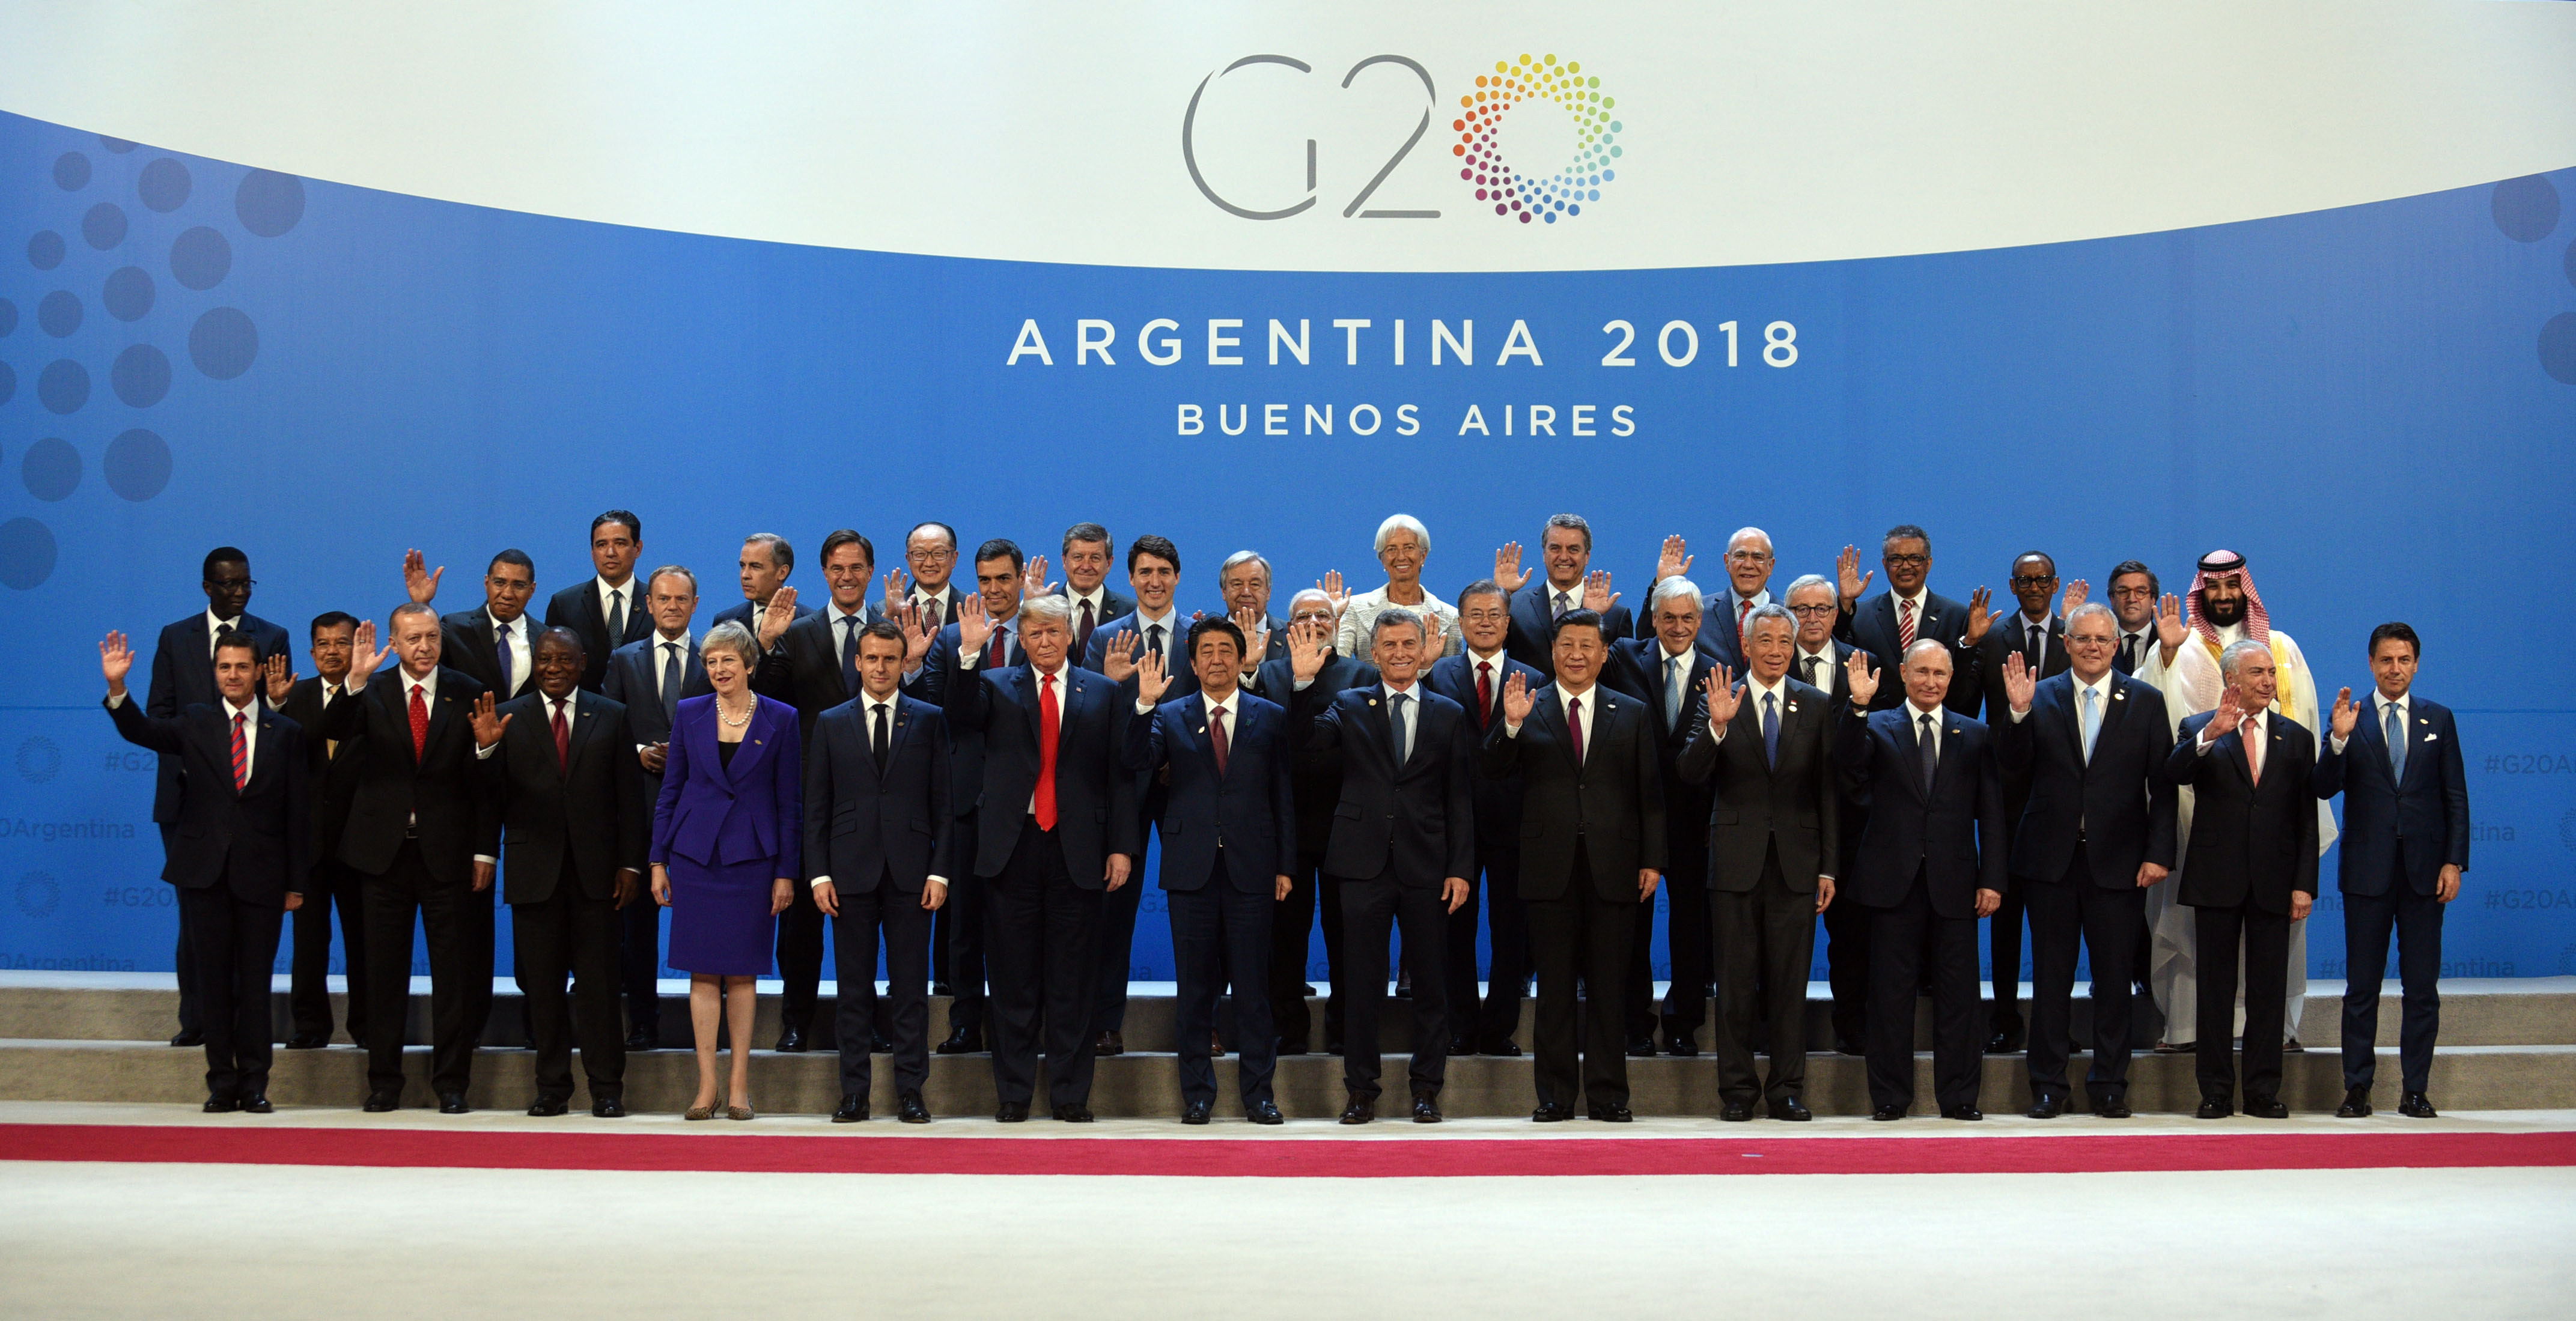 G20 Summit in Buenos Aires - Dec 2018 (Photo courtesy of G20 Argentina)